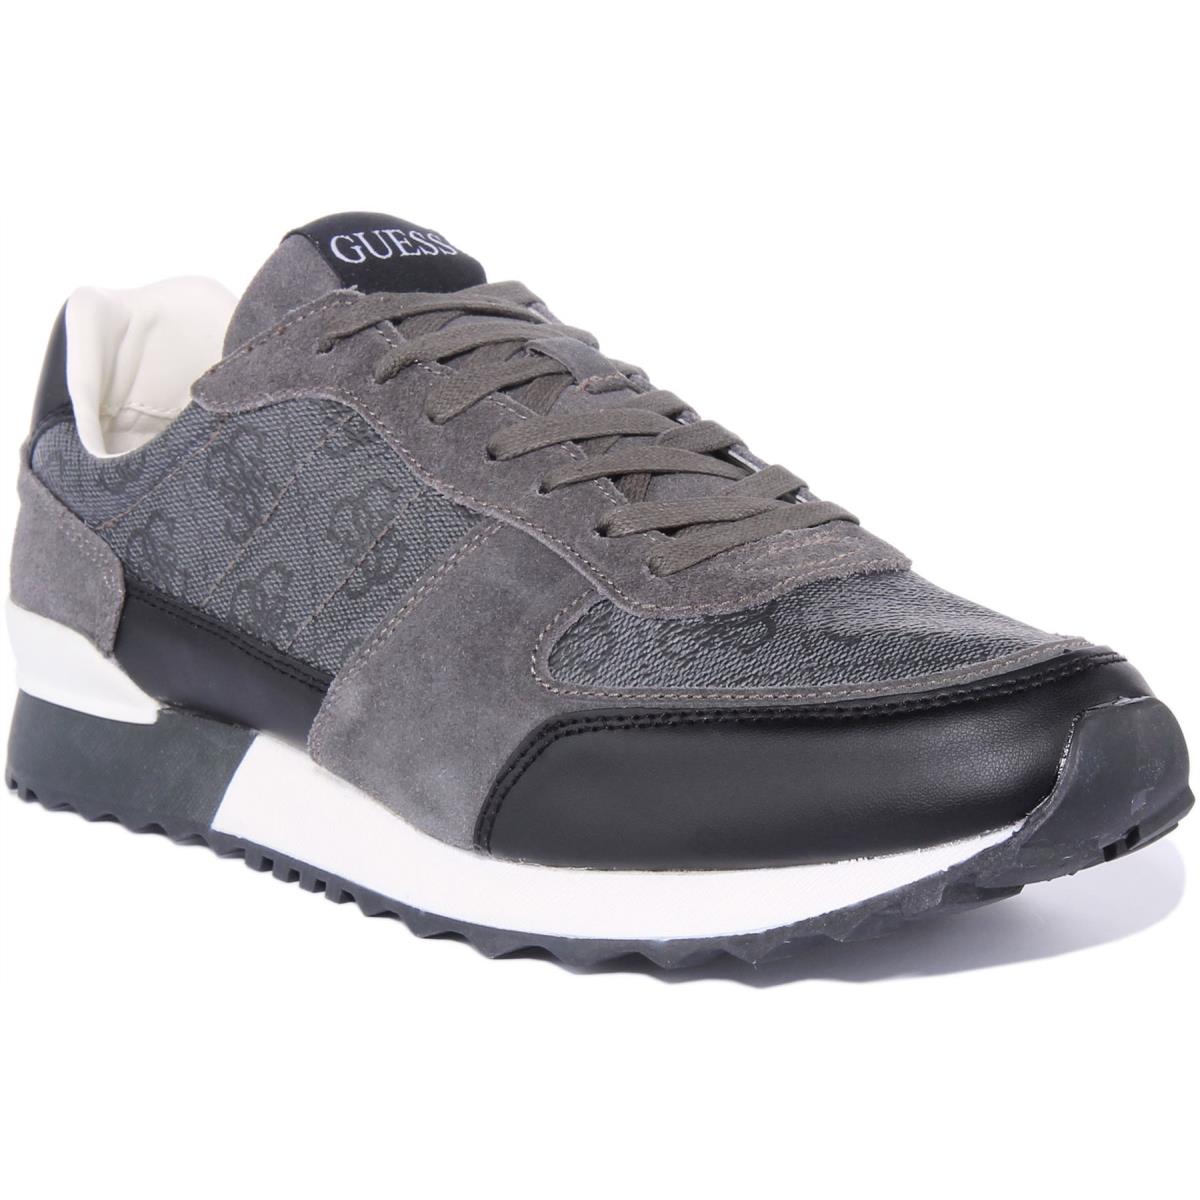 Guess Fm6Pdvfal12 Mens Lace Up Runner Inspired Sneakers In Coal Size US 7 - 13 COAL